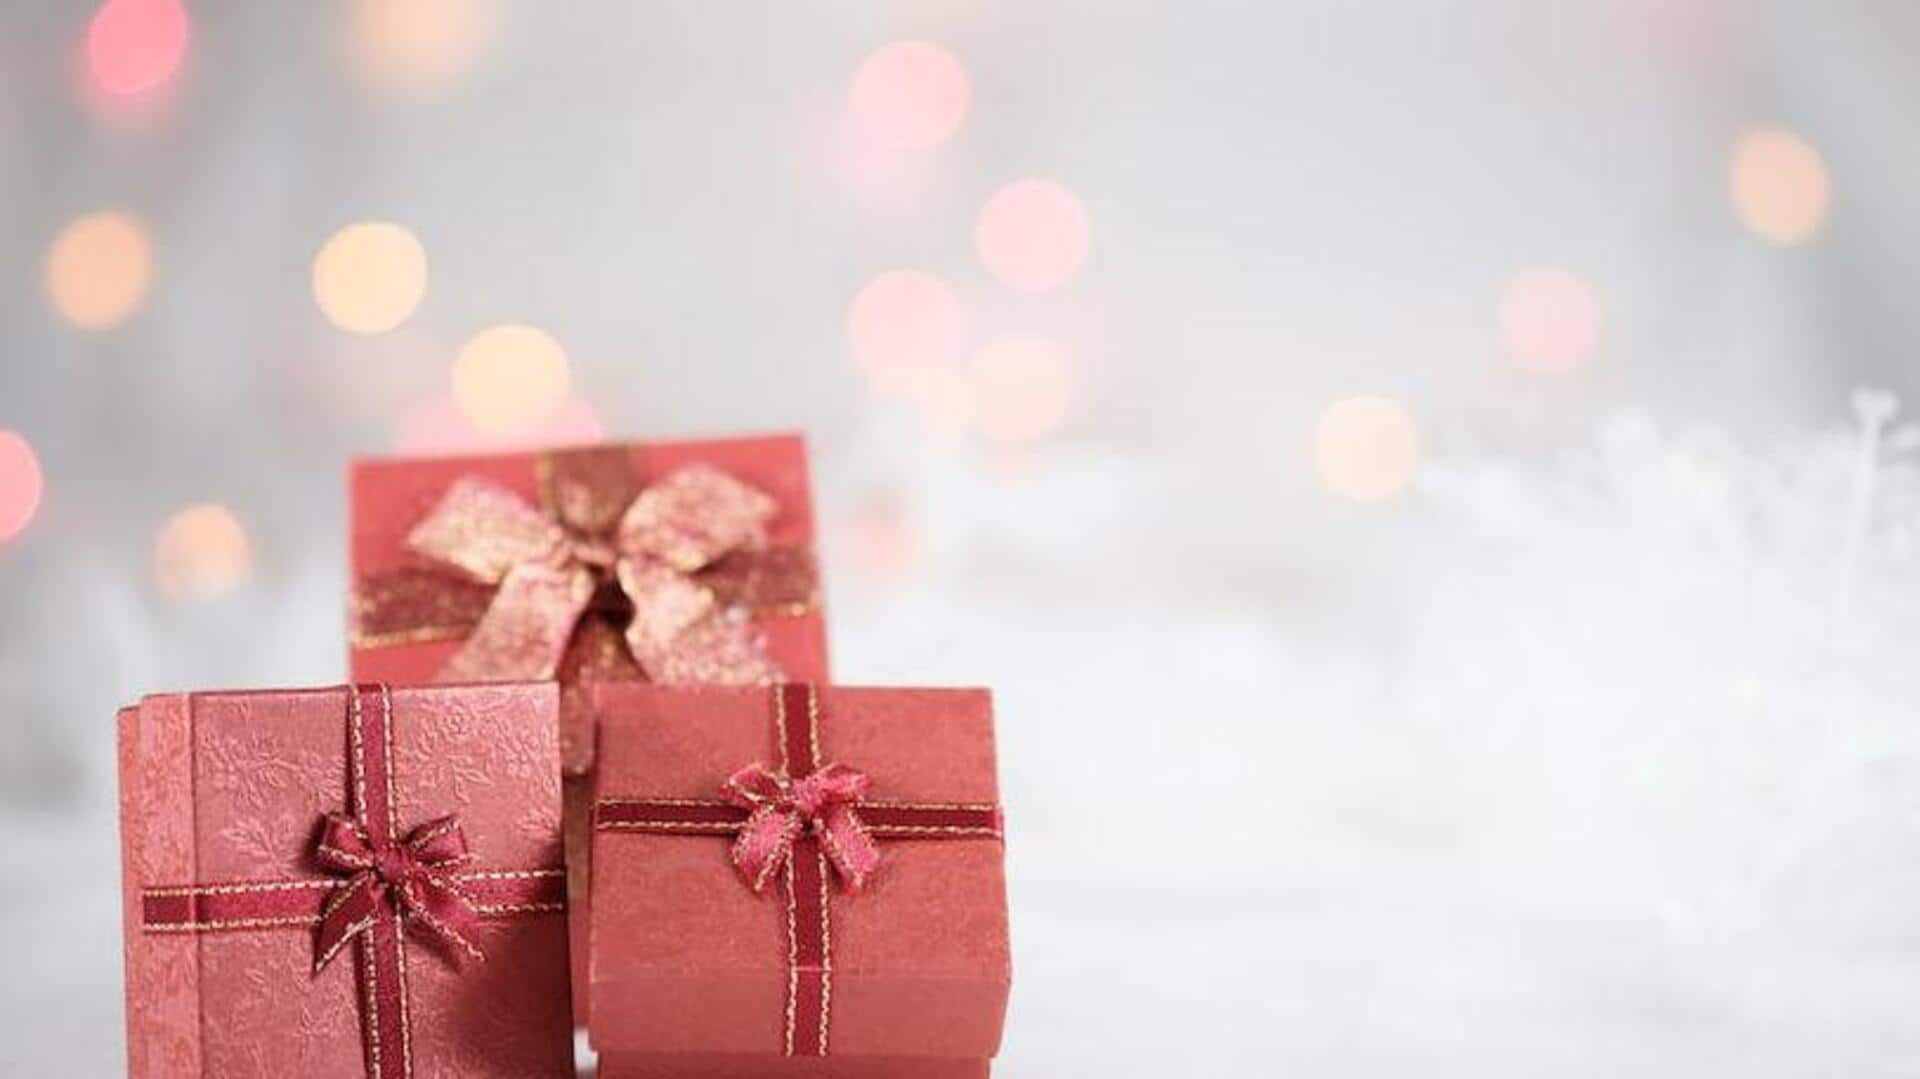 Corporate Diwali gifting ideas to strengthen business bonds